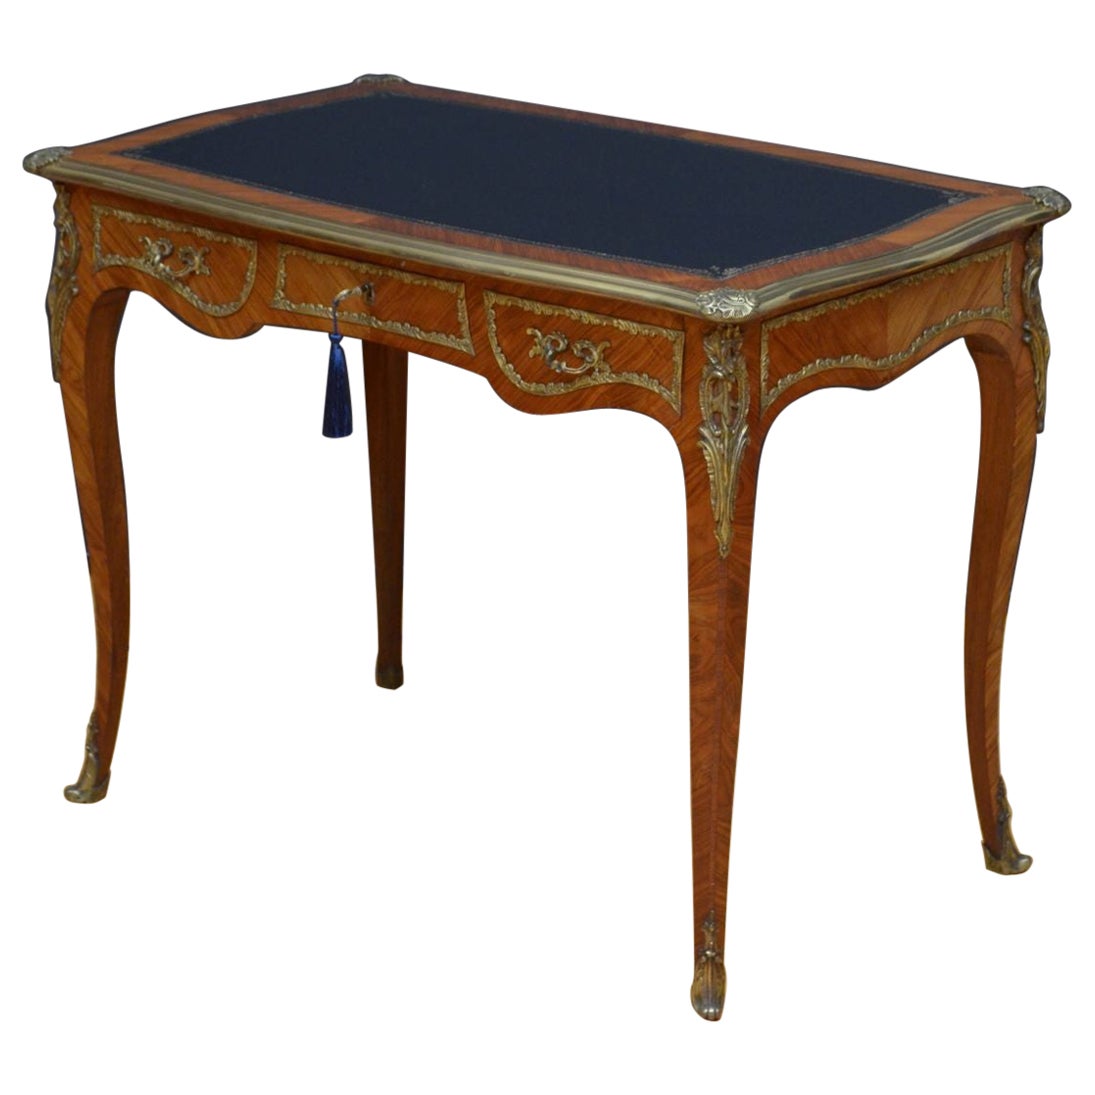 Outstanding Antique Kingwood Writing Table For Sale